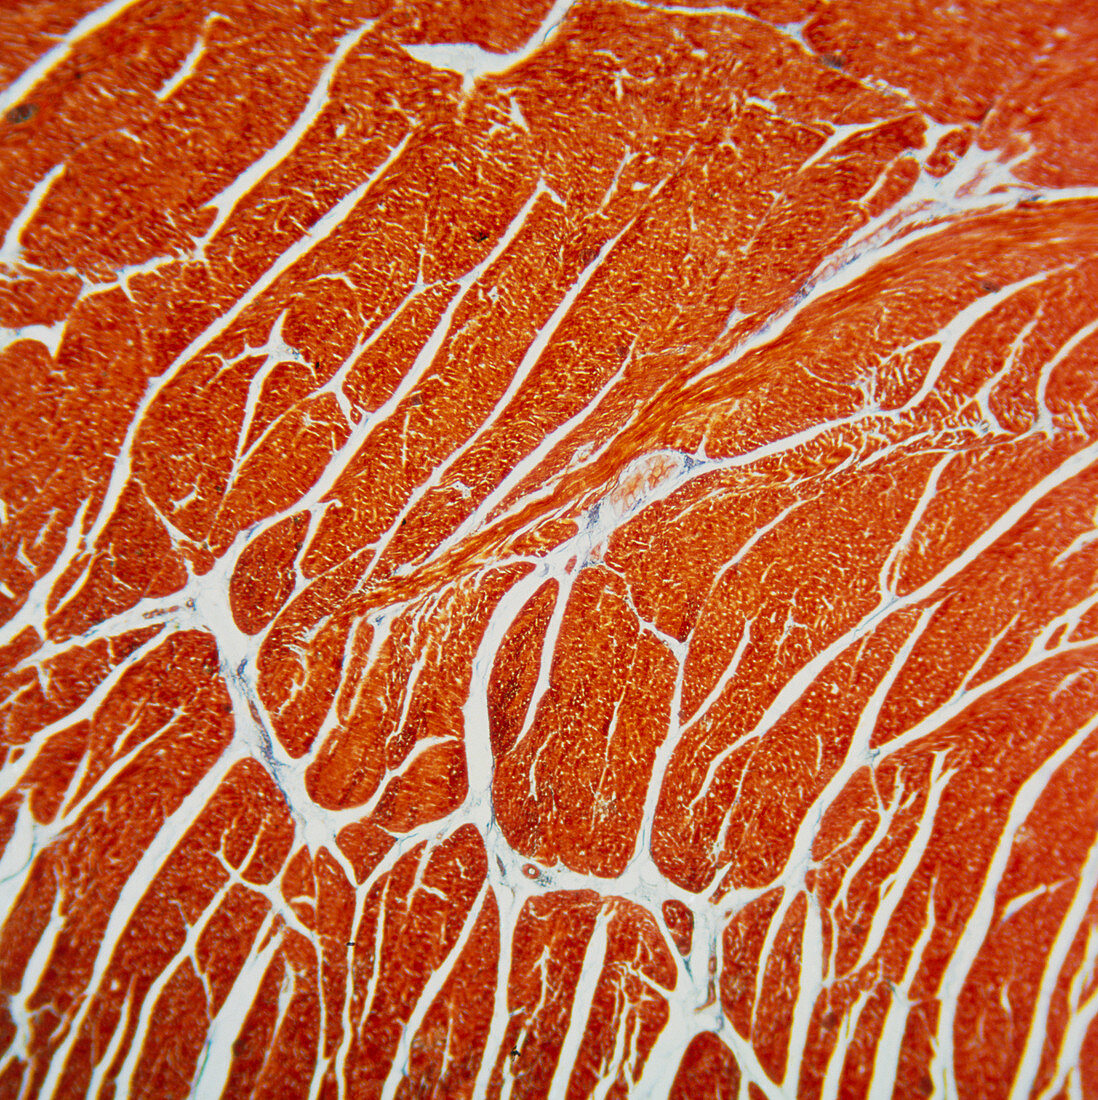 LM of cross section of heart muscle